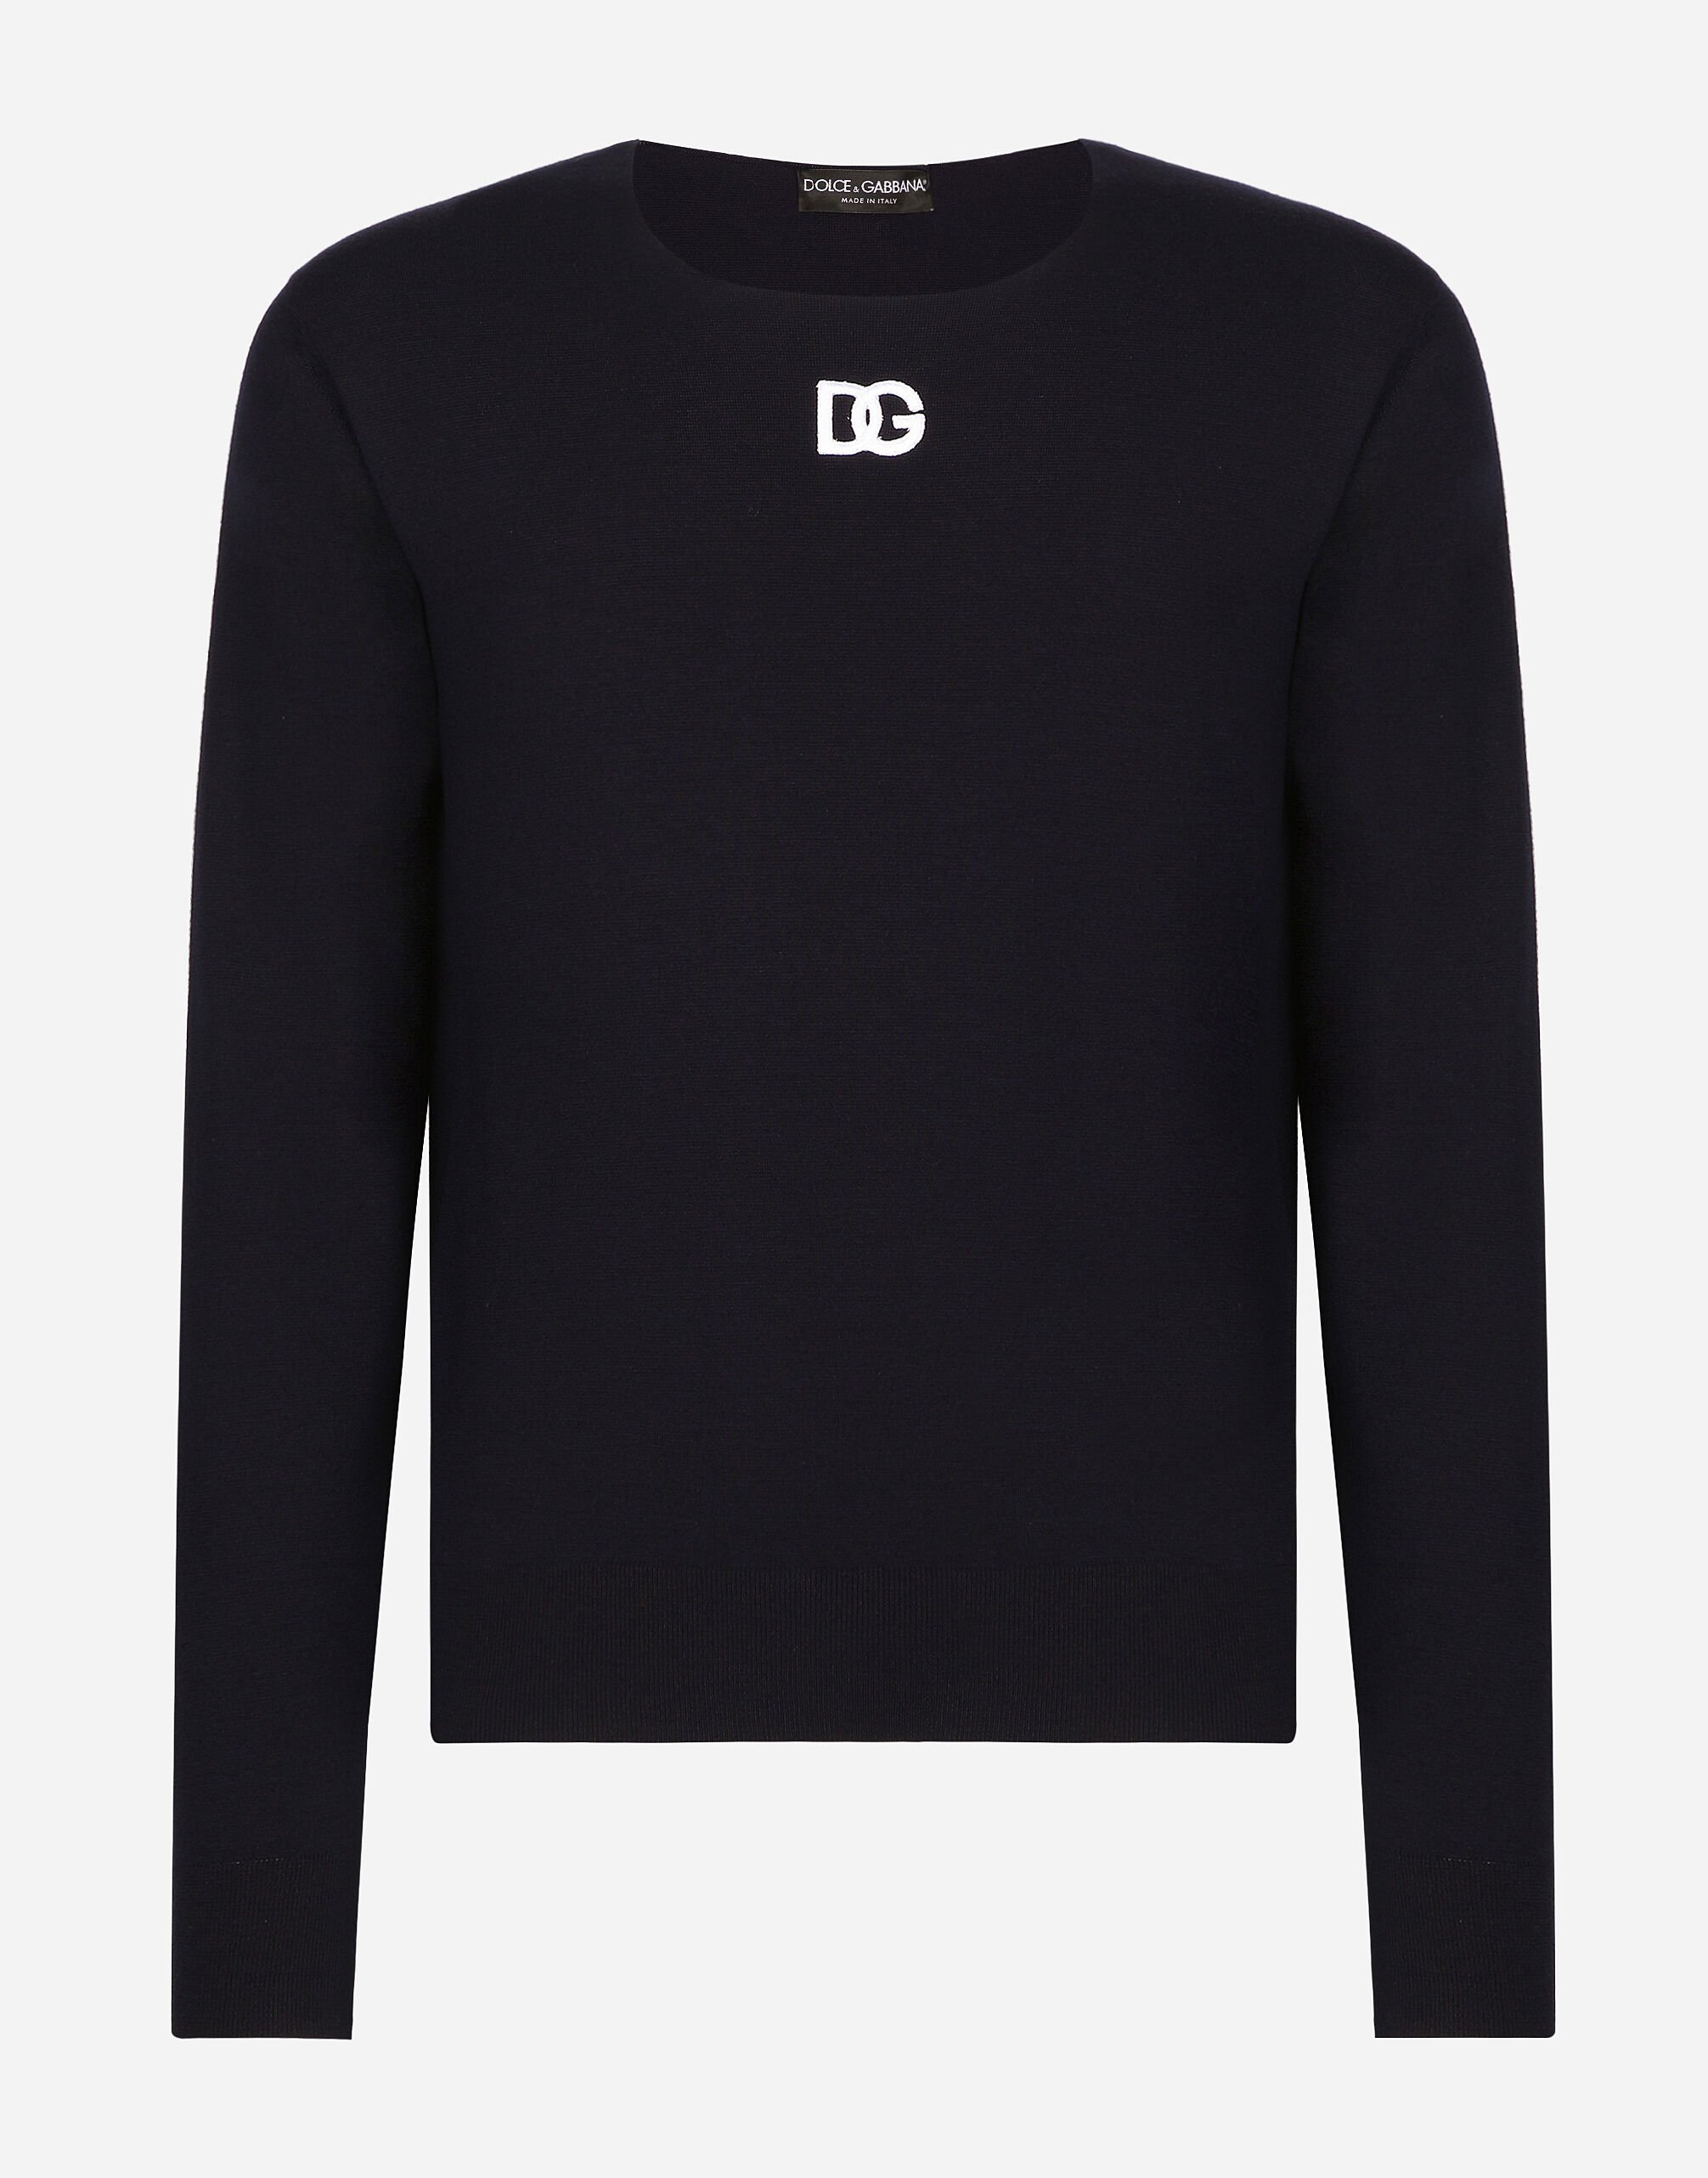 ${brand} Round-neck virgin wool sweater with DG logo ${colorDescription} ${masterID}